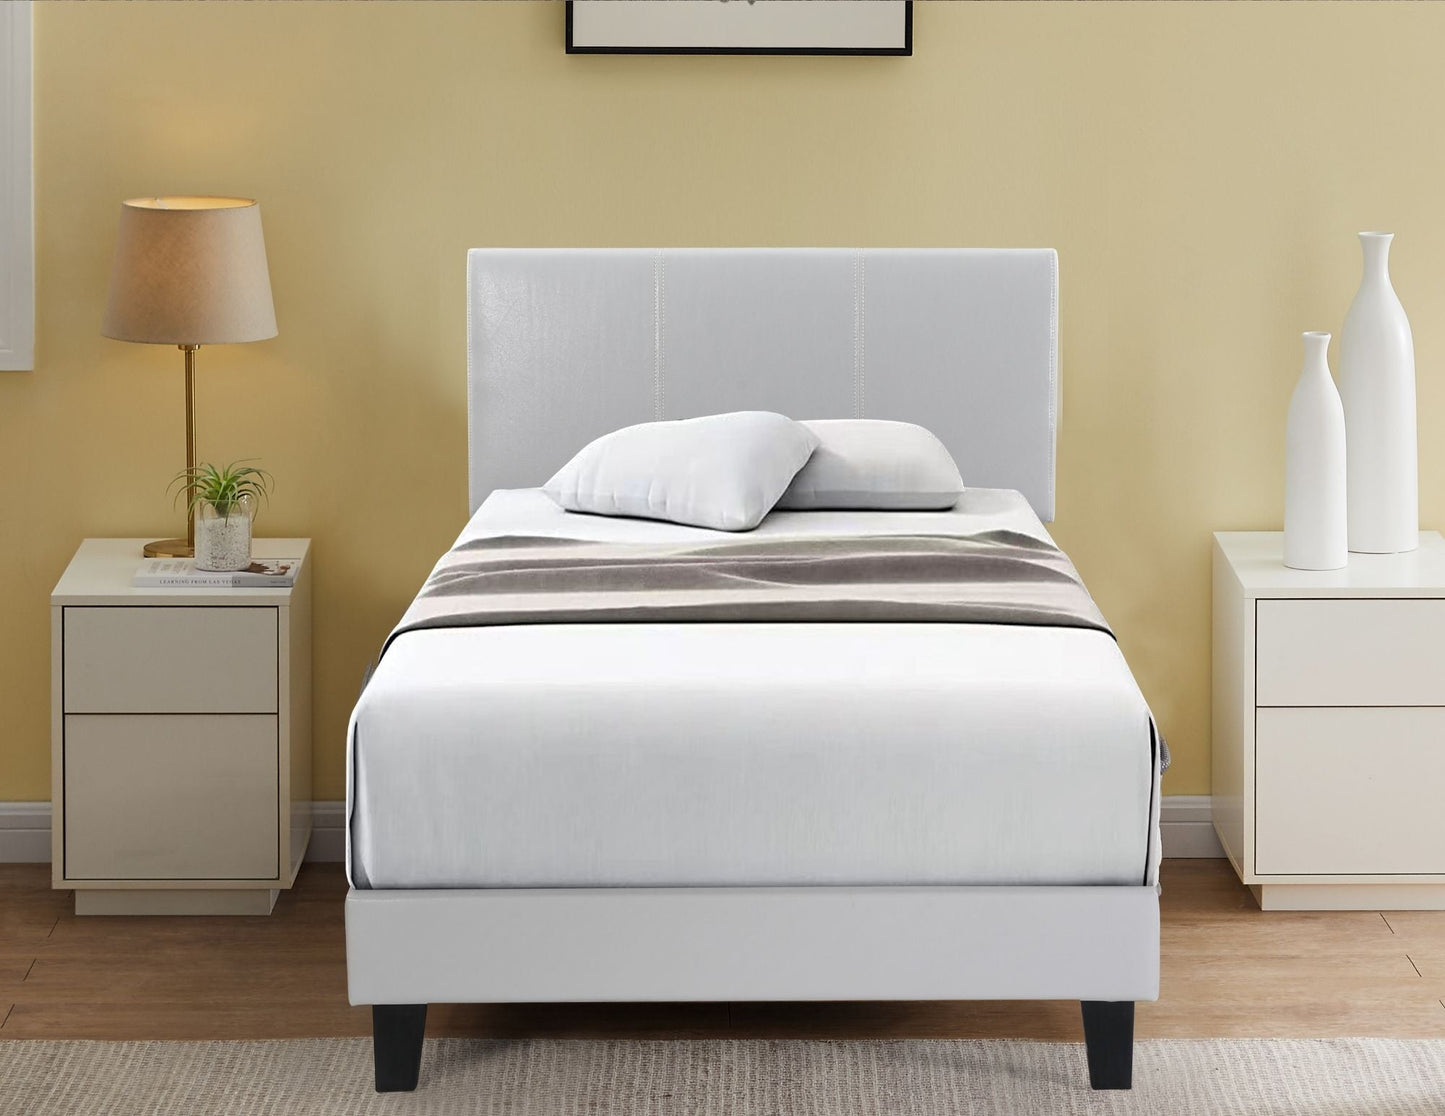 DOUBLE (FULL) SIZE- (DELTA WHITE)- LEATHER BED FRAME IN A BOX- WITH SLATS